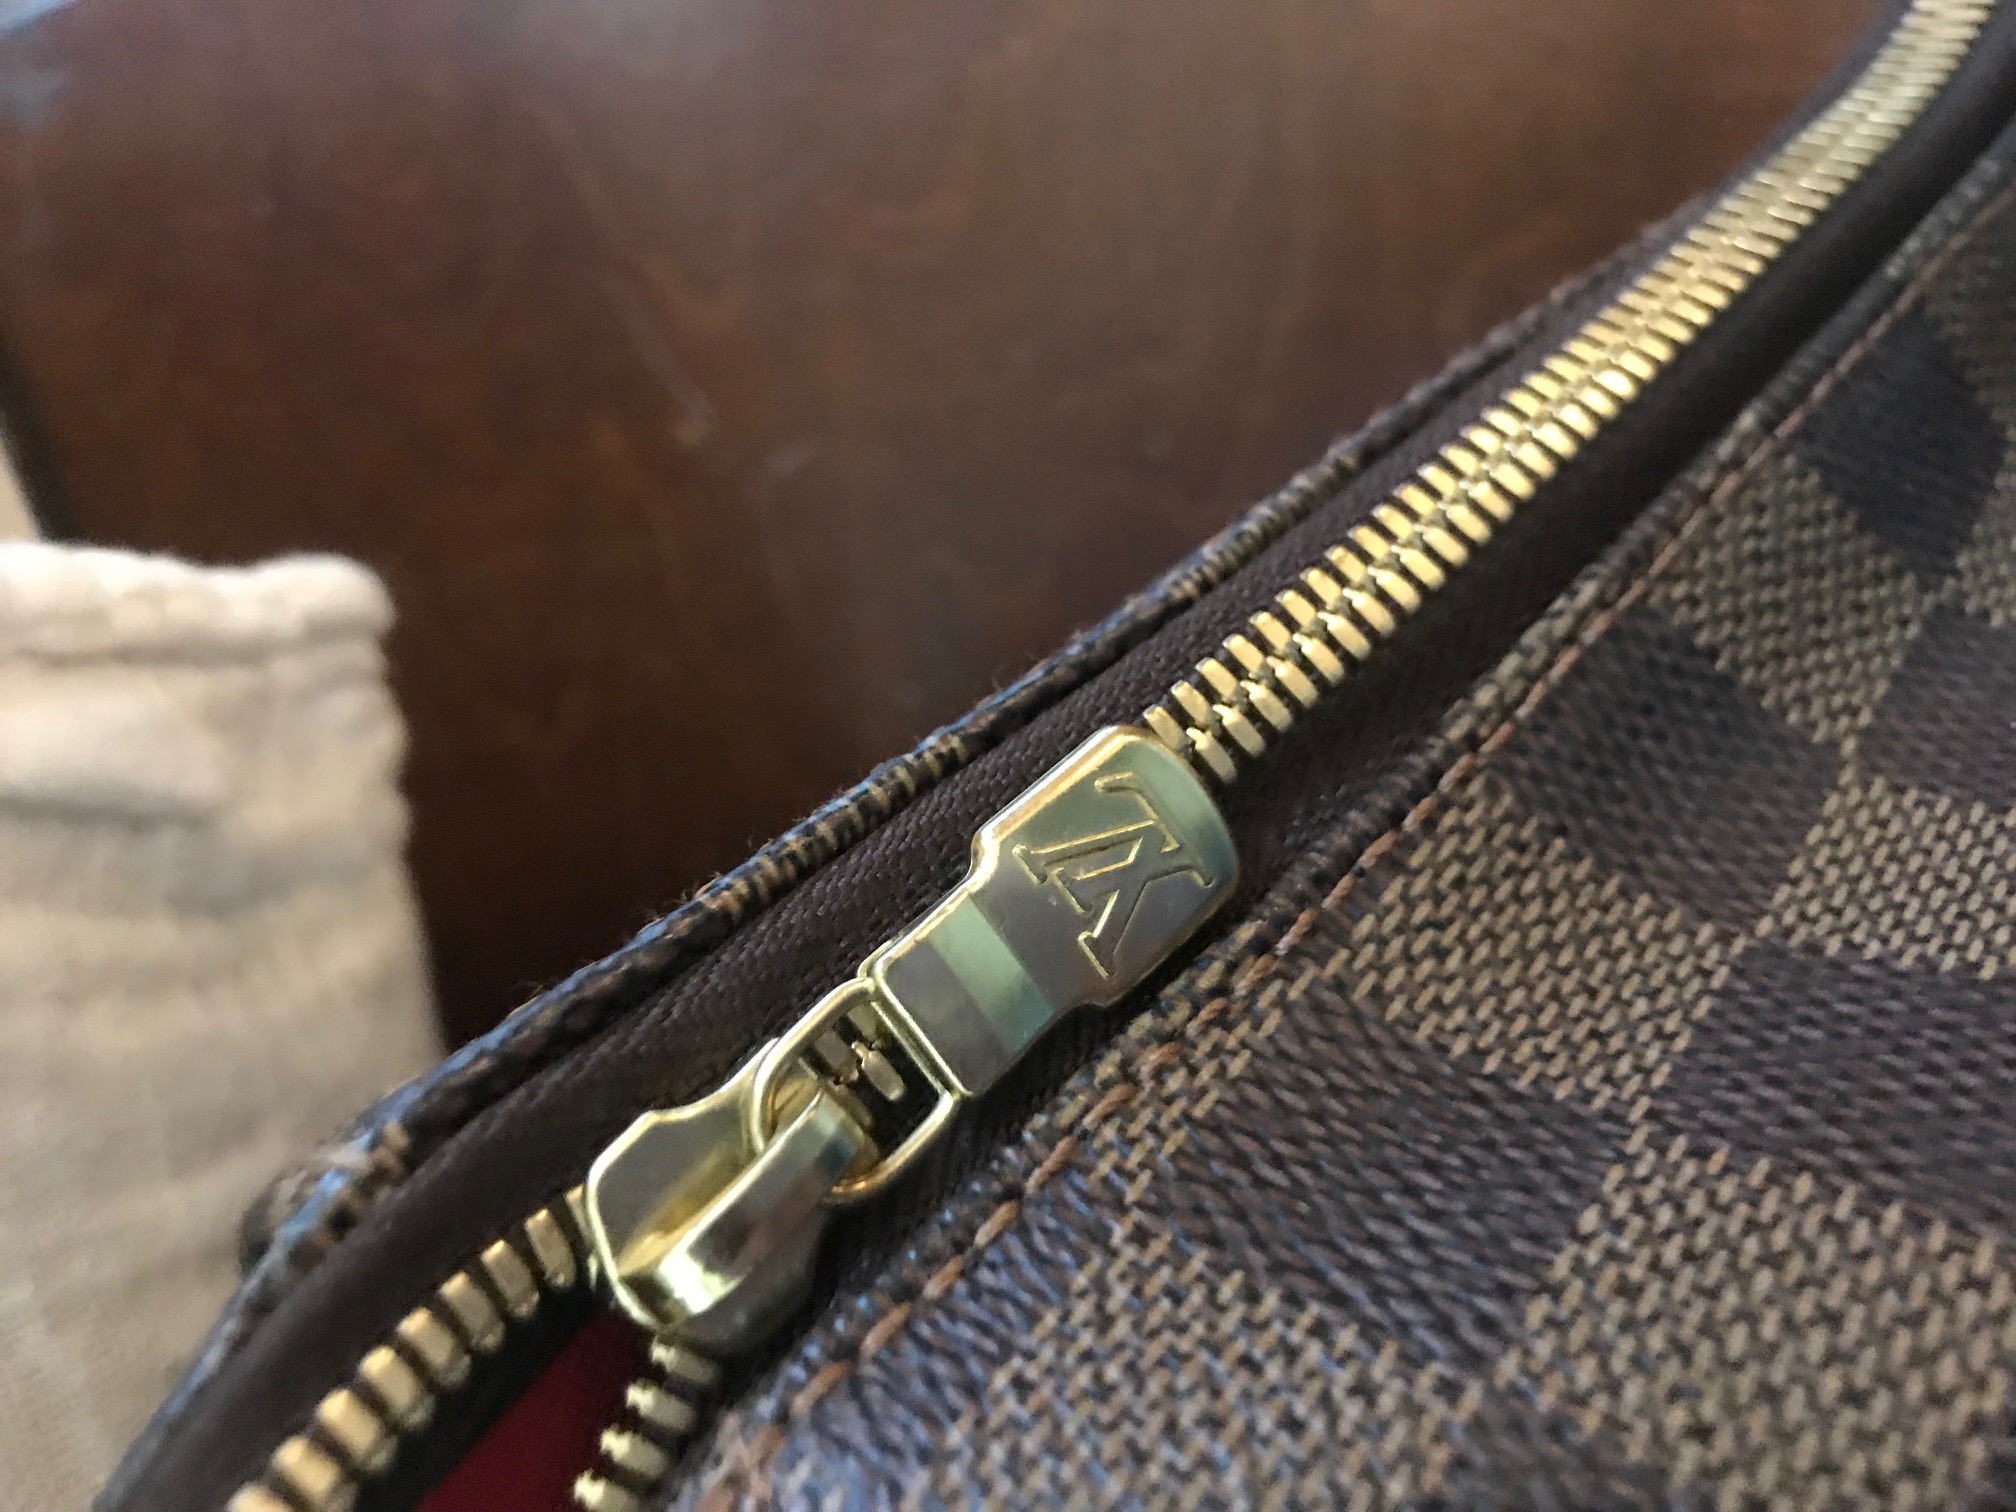 Authentic Louis Vuitton Bag, c. 2001: 223 ppm Lead. 90 ppm is unsafe. Does  your child play with yours?